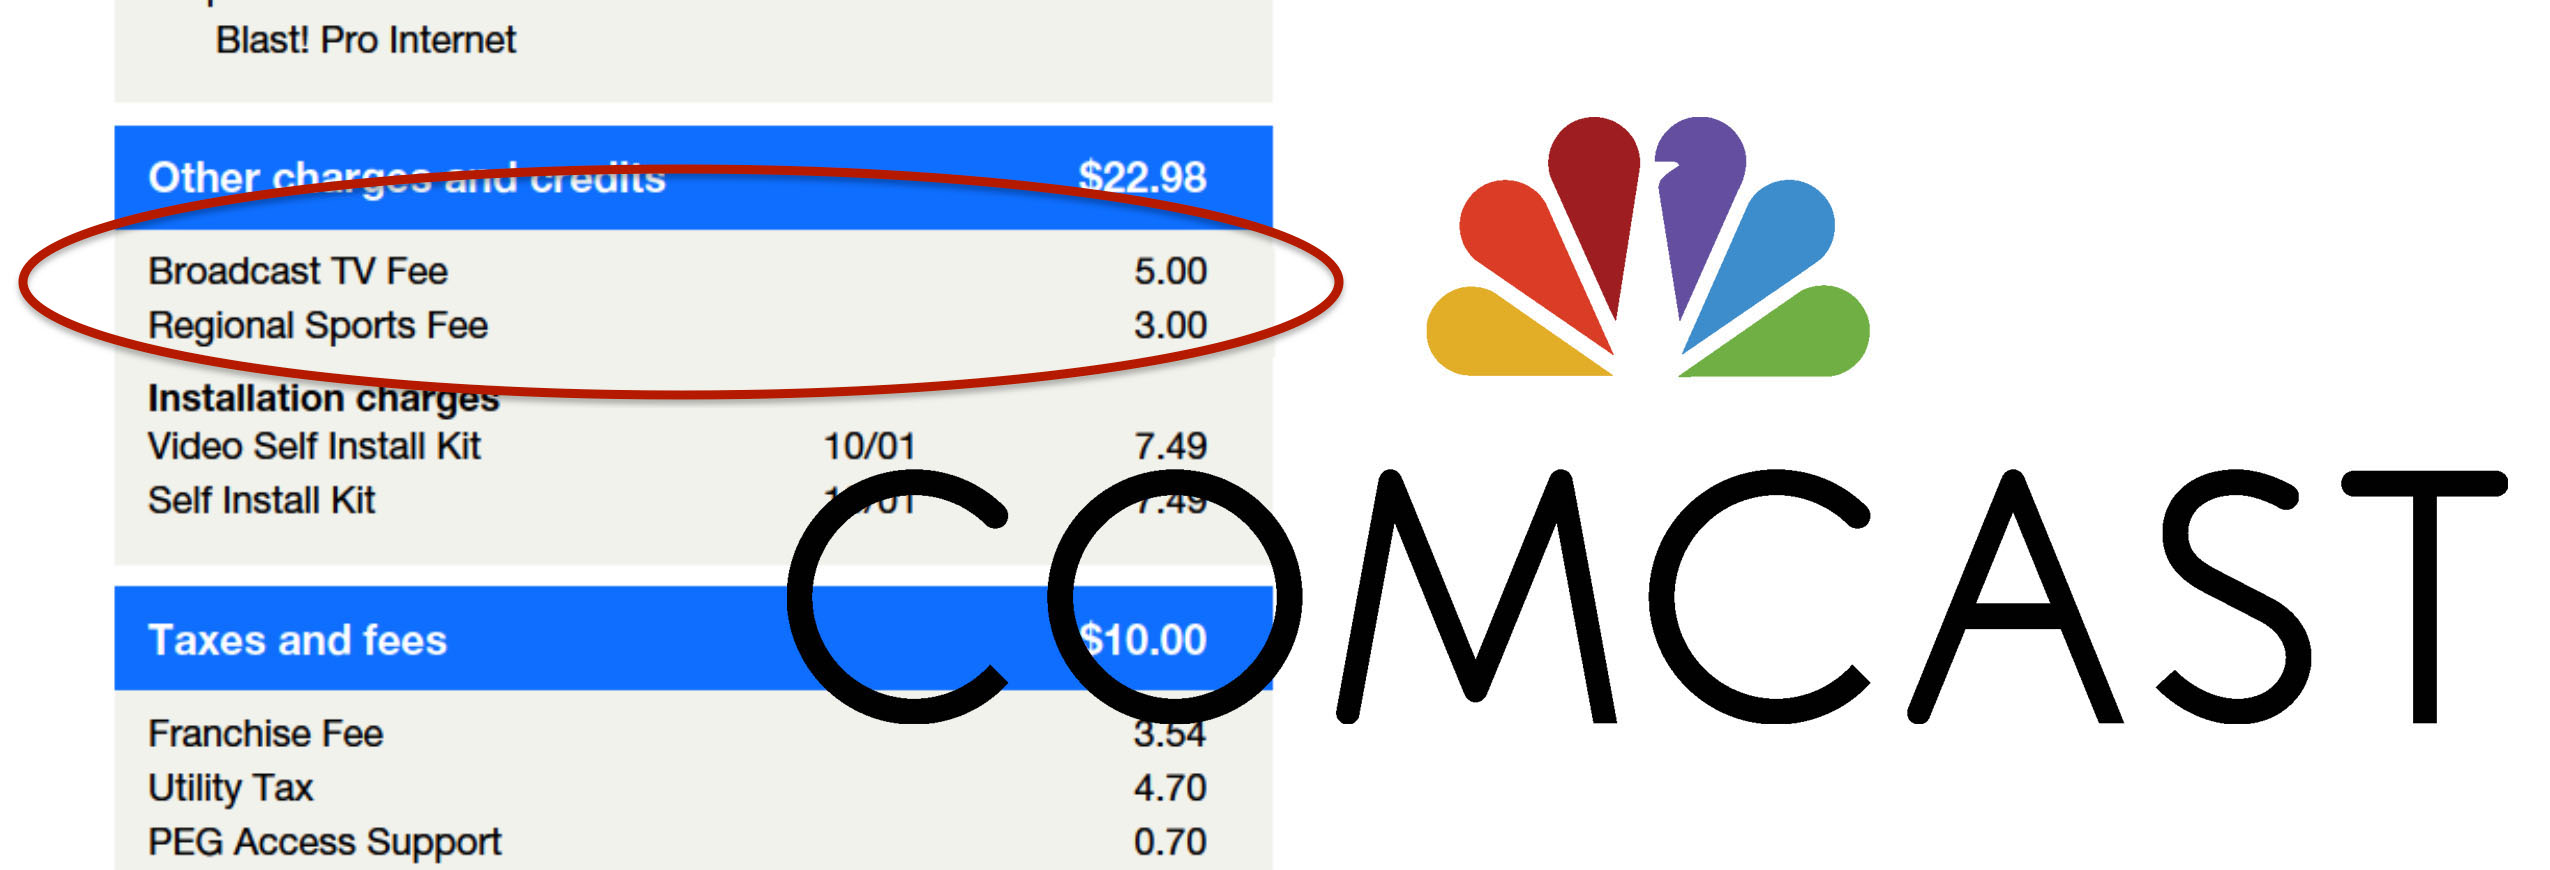 Comcast Fails To Shut Down Customer Lawsuit Over ‘Broadcast TV’ & ‘Regional Sports’ Fees